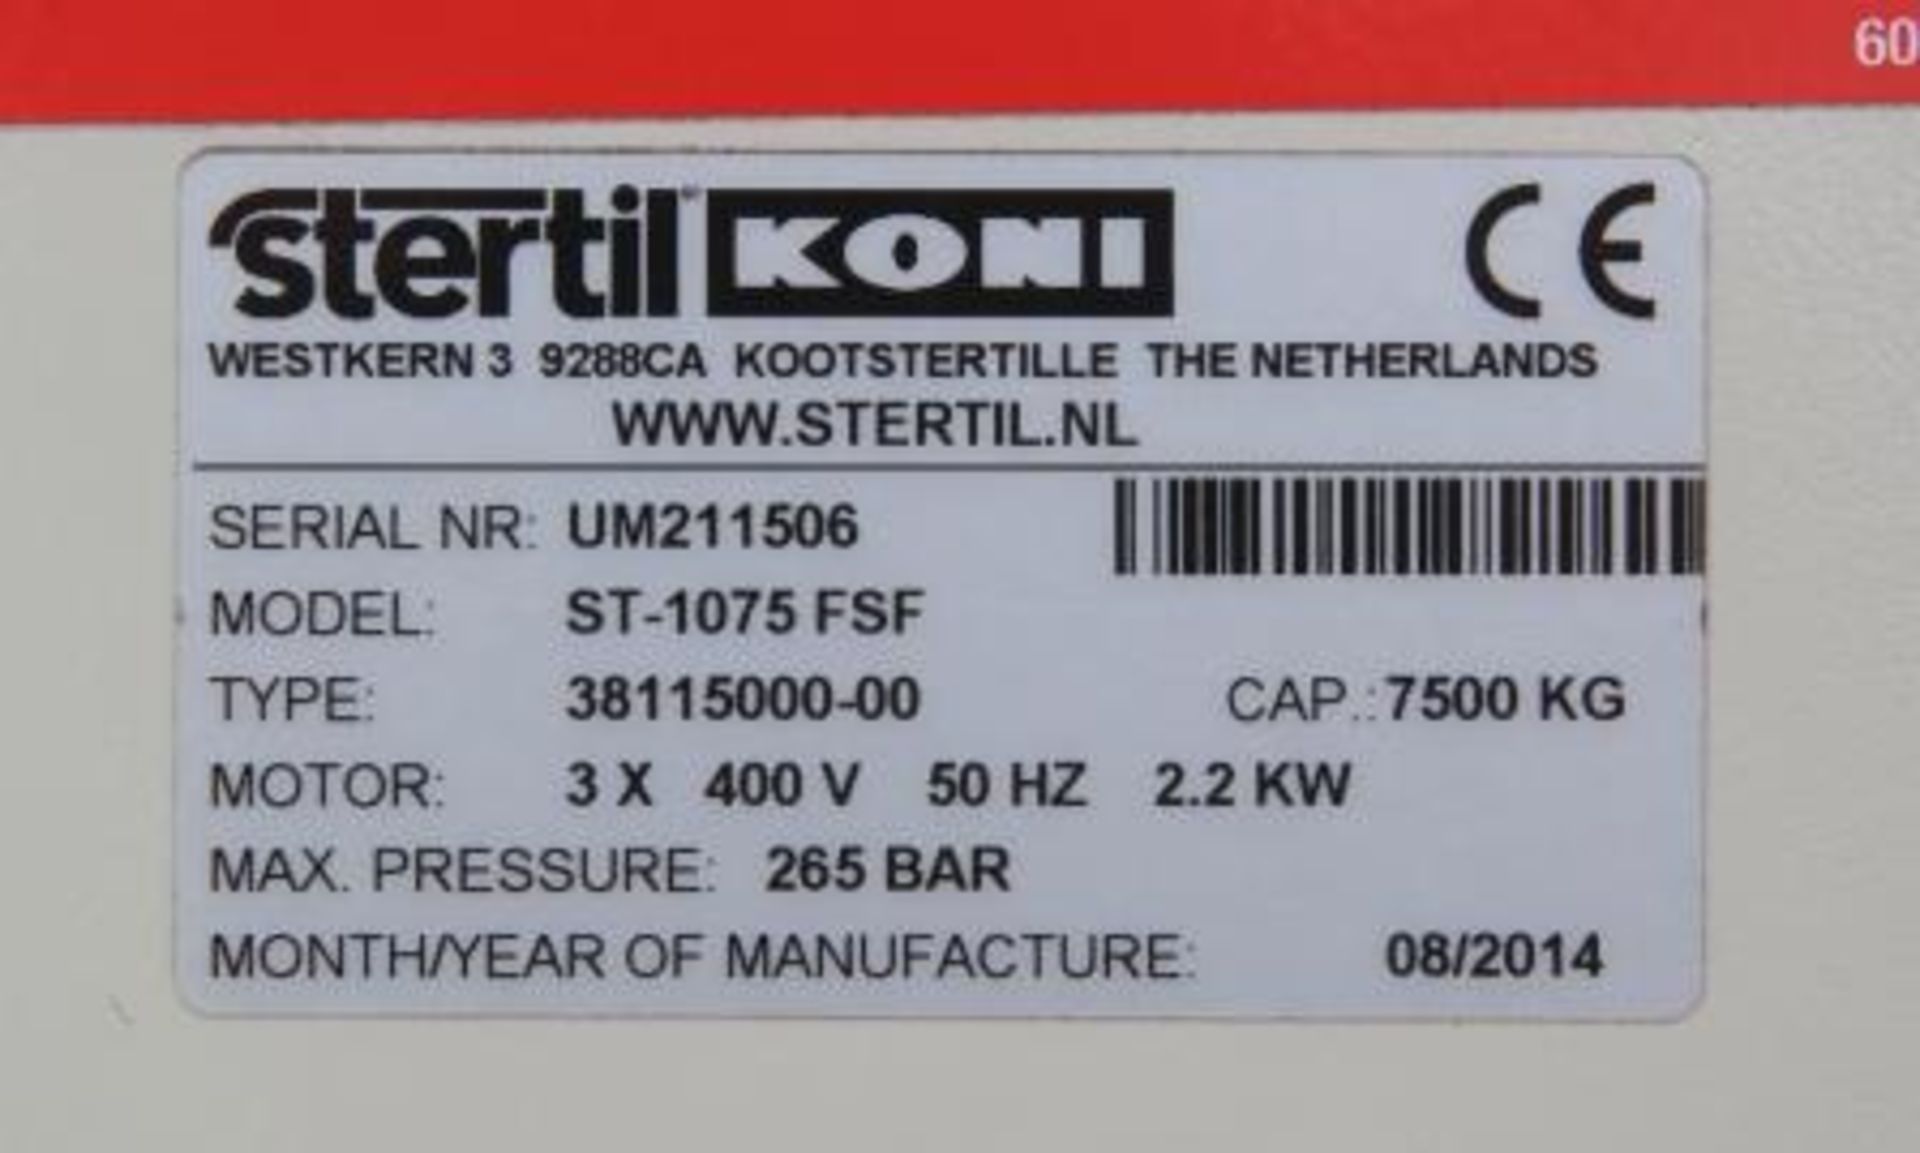 Stertil Koni Mobile Column Lifts (Cabled) - Image 15 of 21